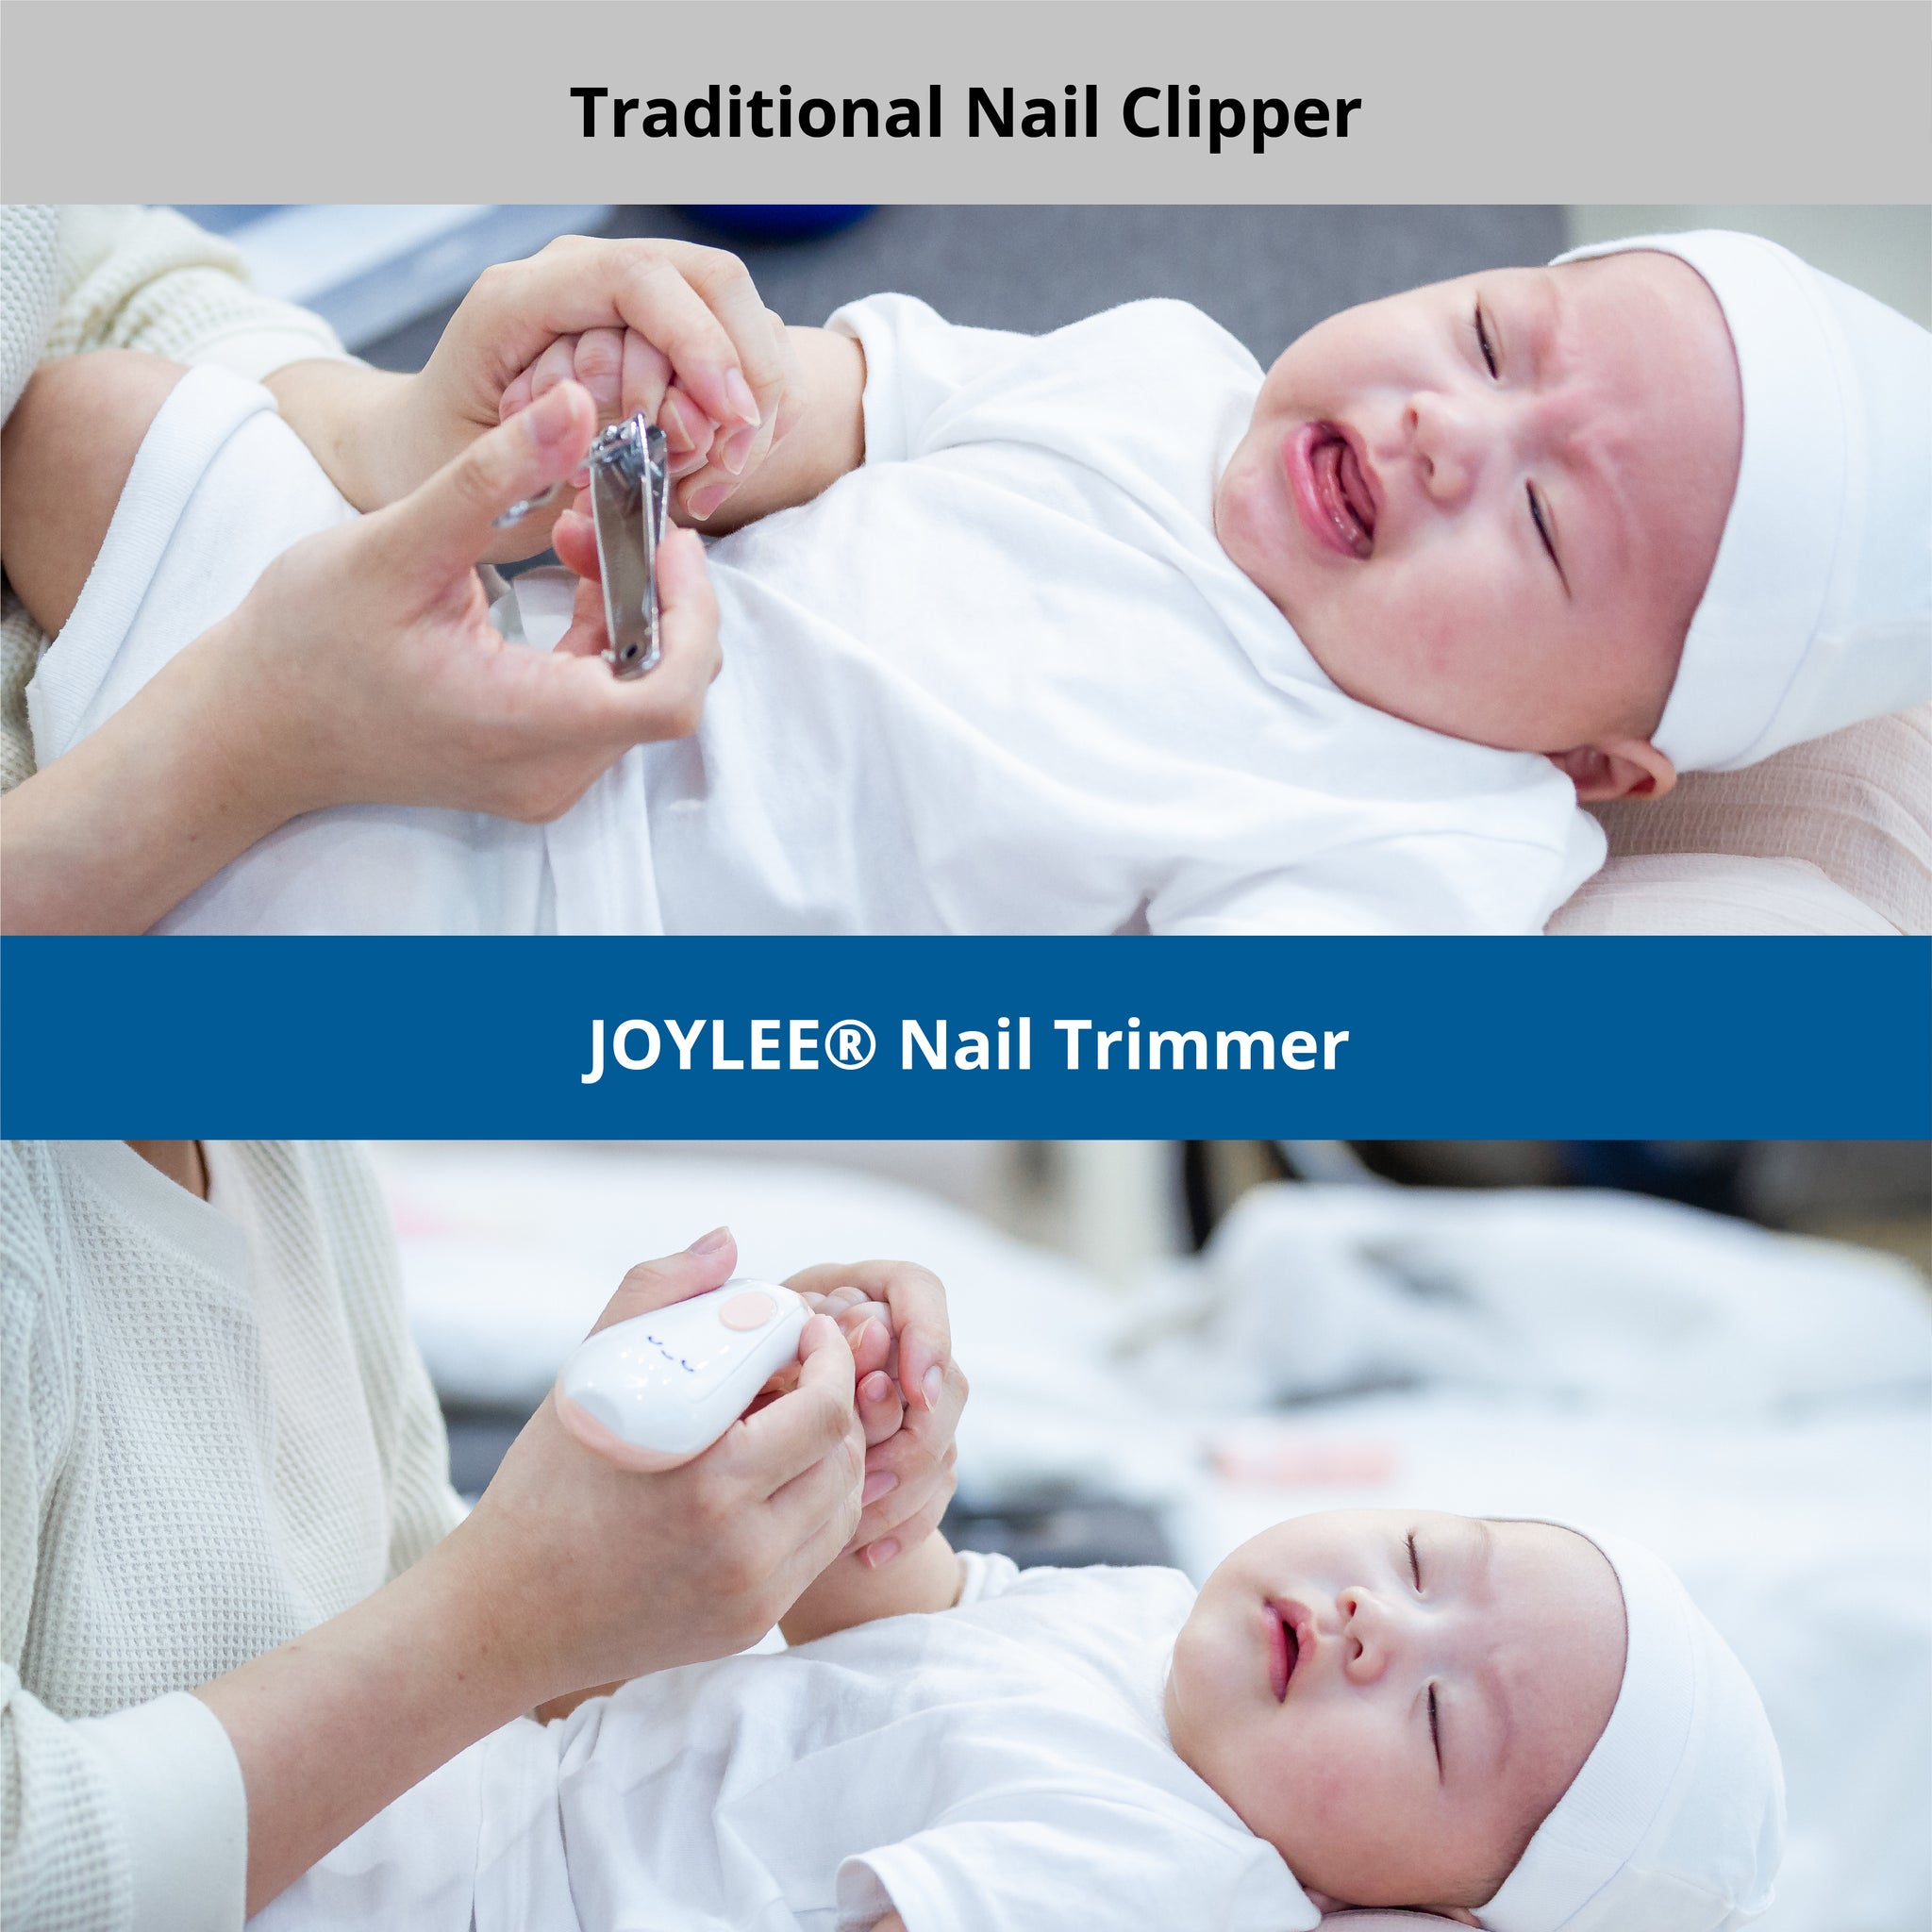 The difference between traditional nail clipper and joylee nail trimmer